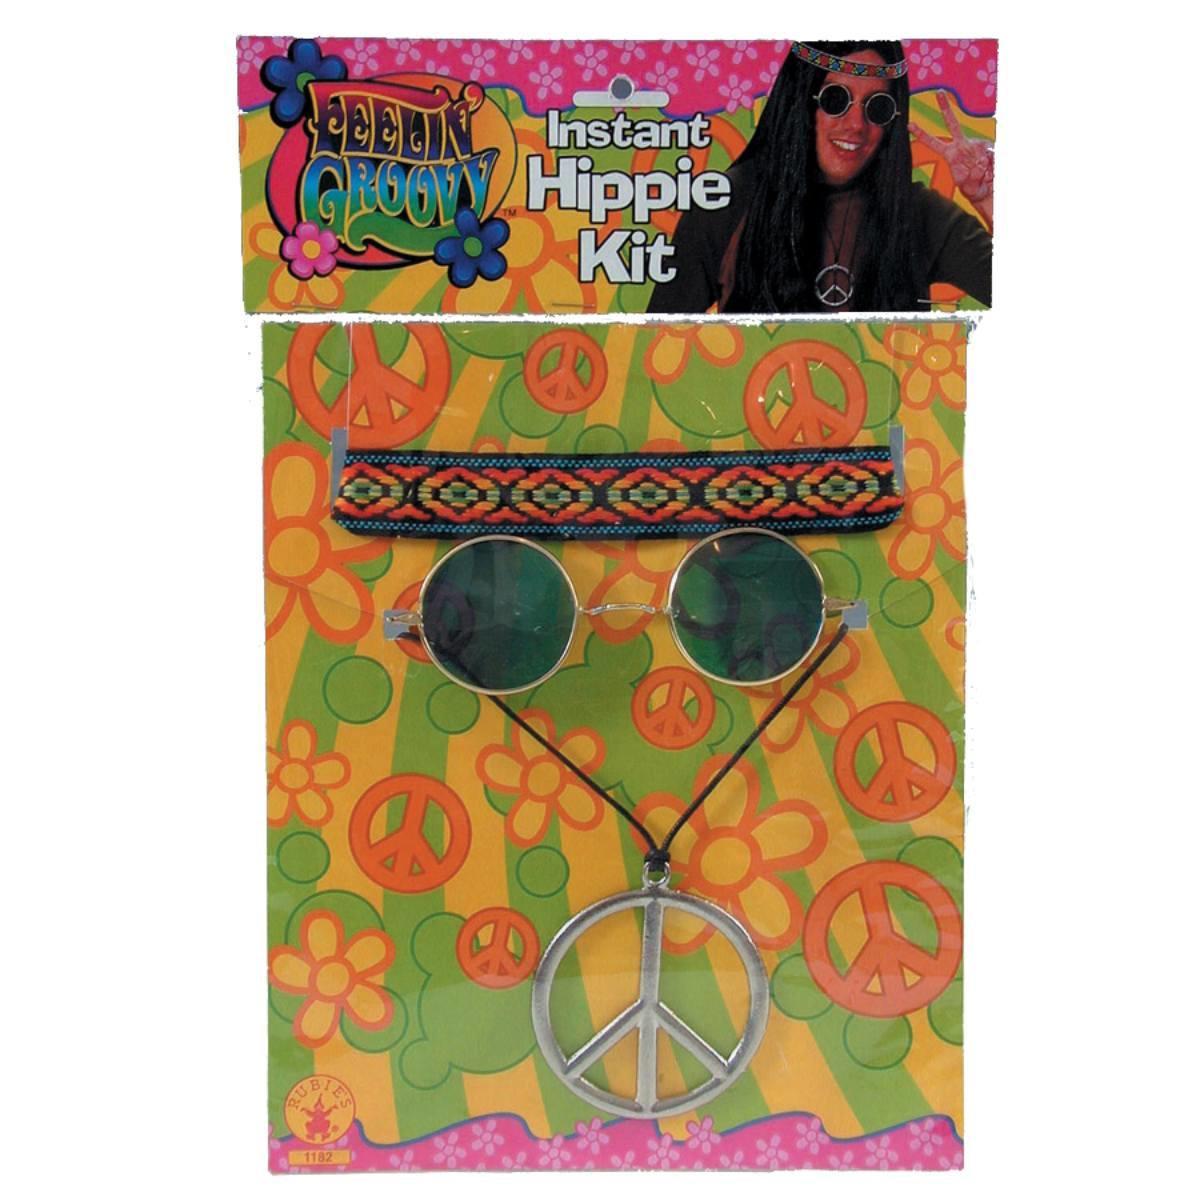 Feelin' Groovy Kit - Male costume accessory kit by Rubies 1182 available here at Karnival Costumes online party shop